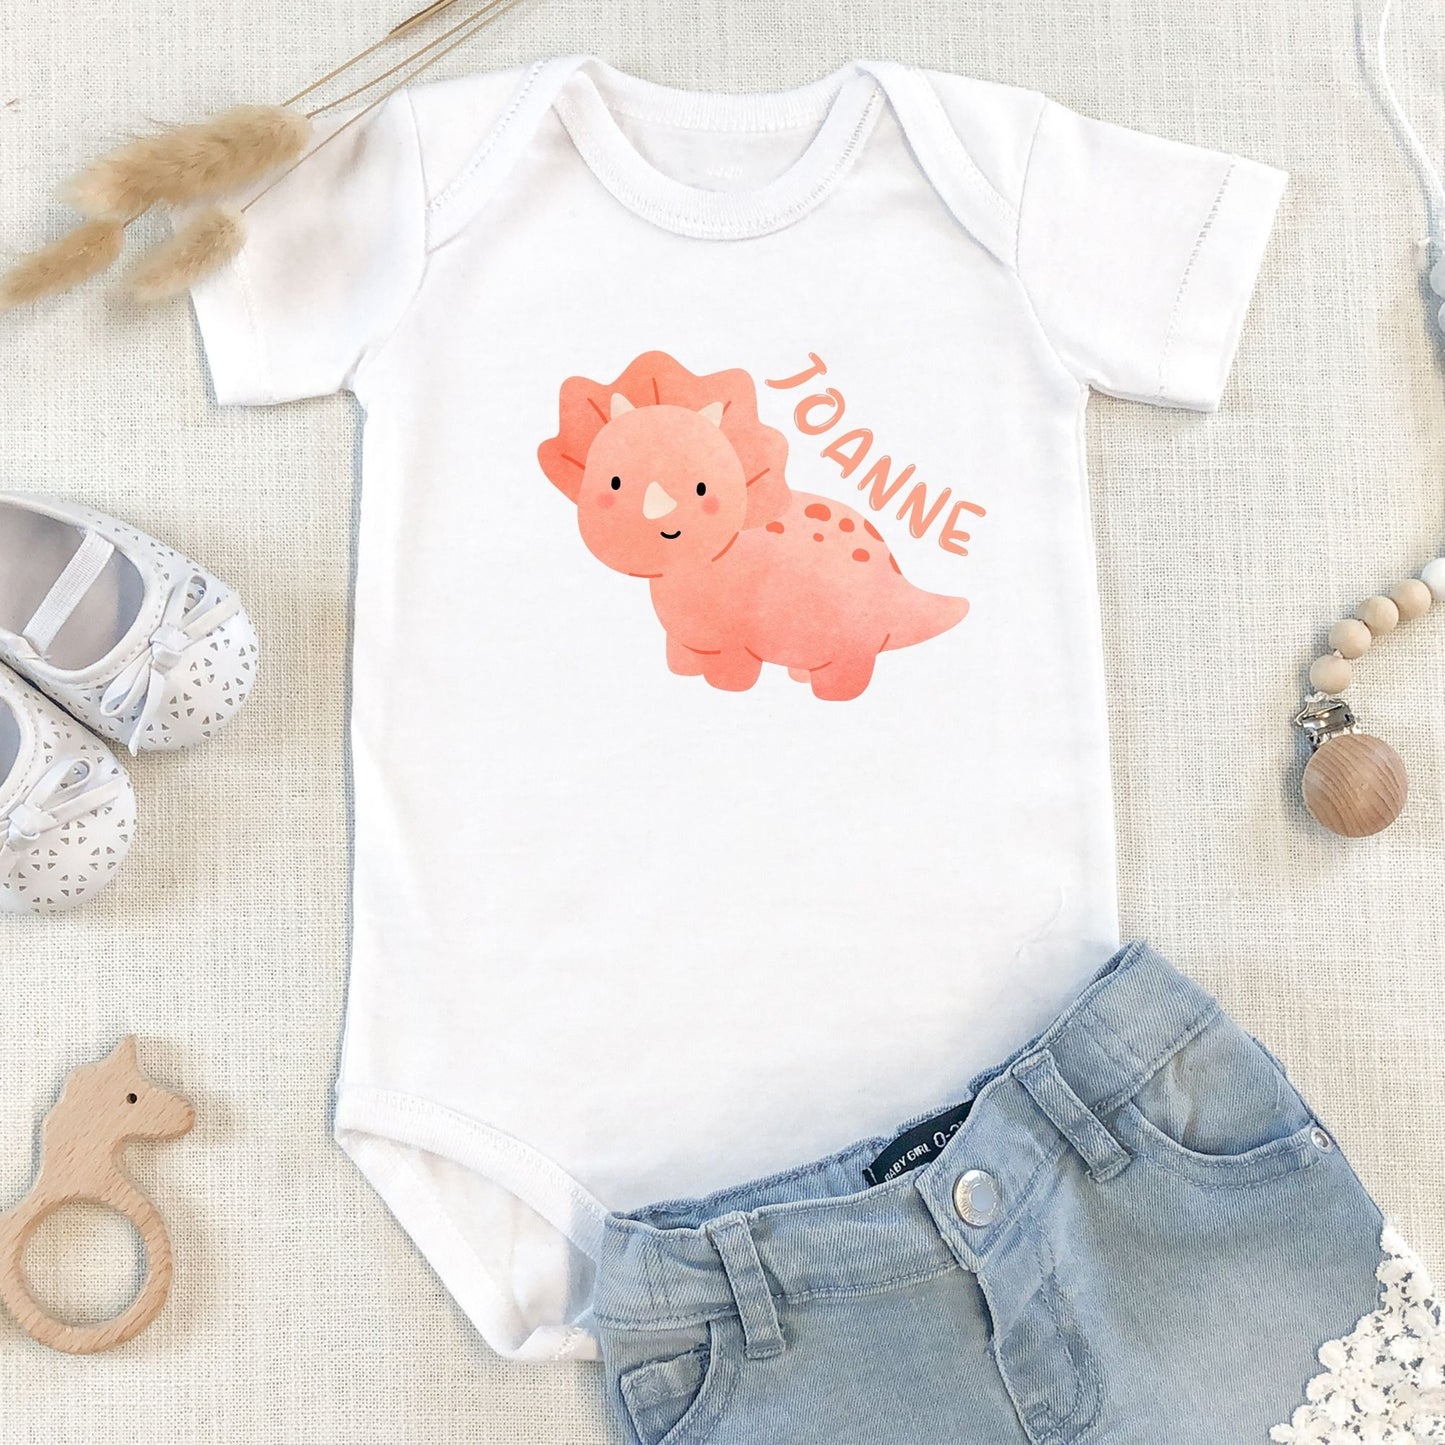 Personalized Name "Dino Love" Baby Romper